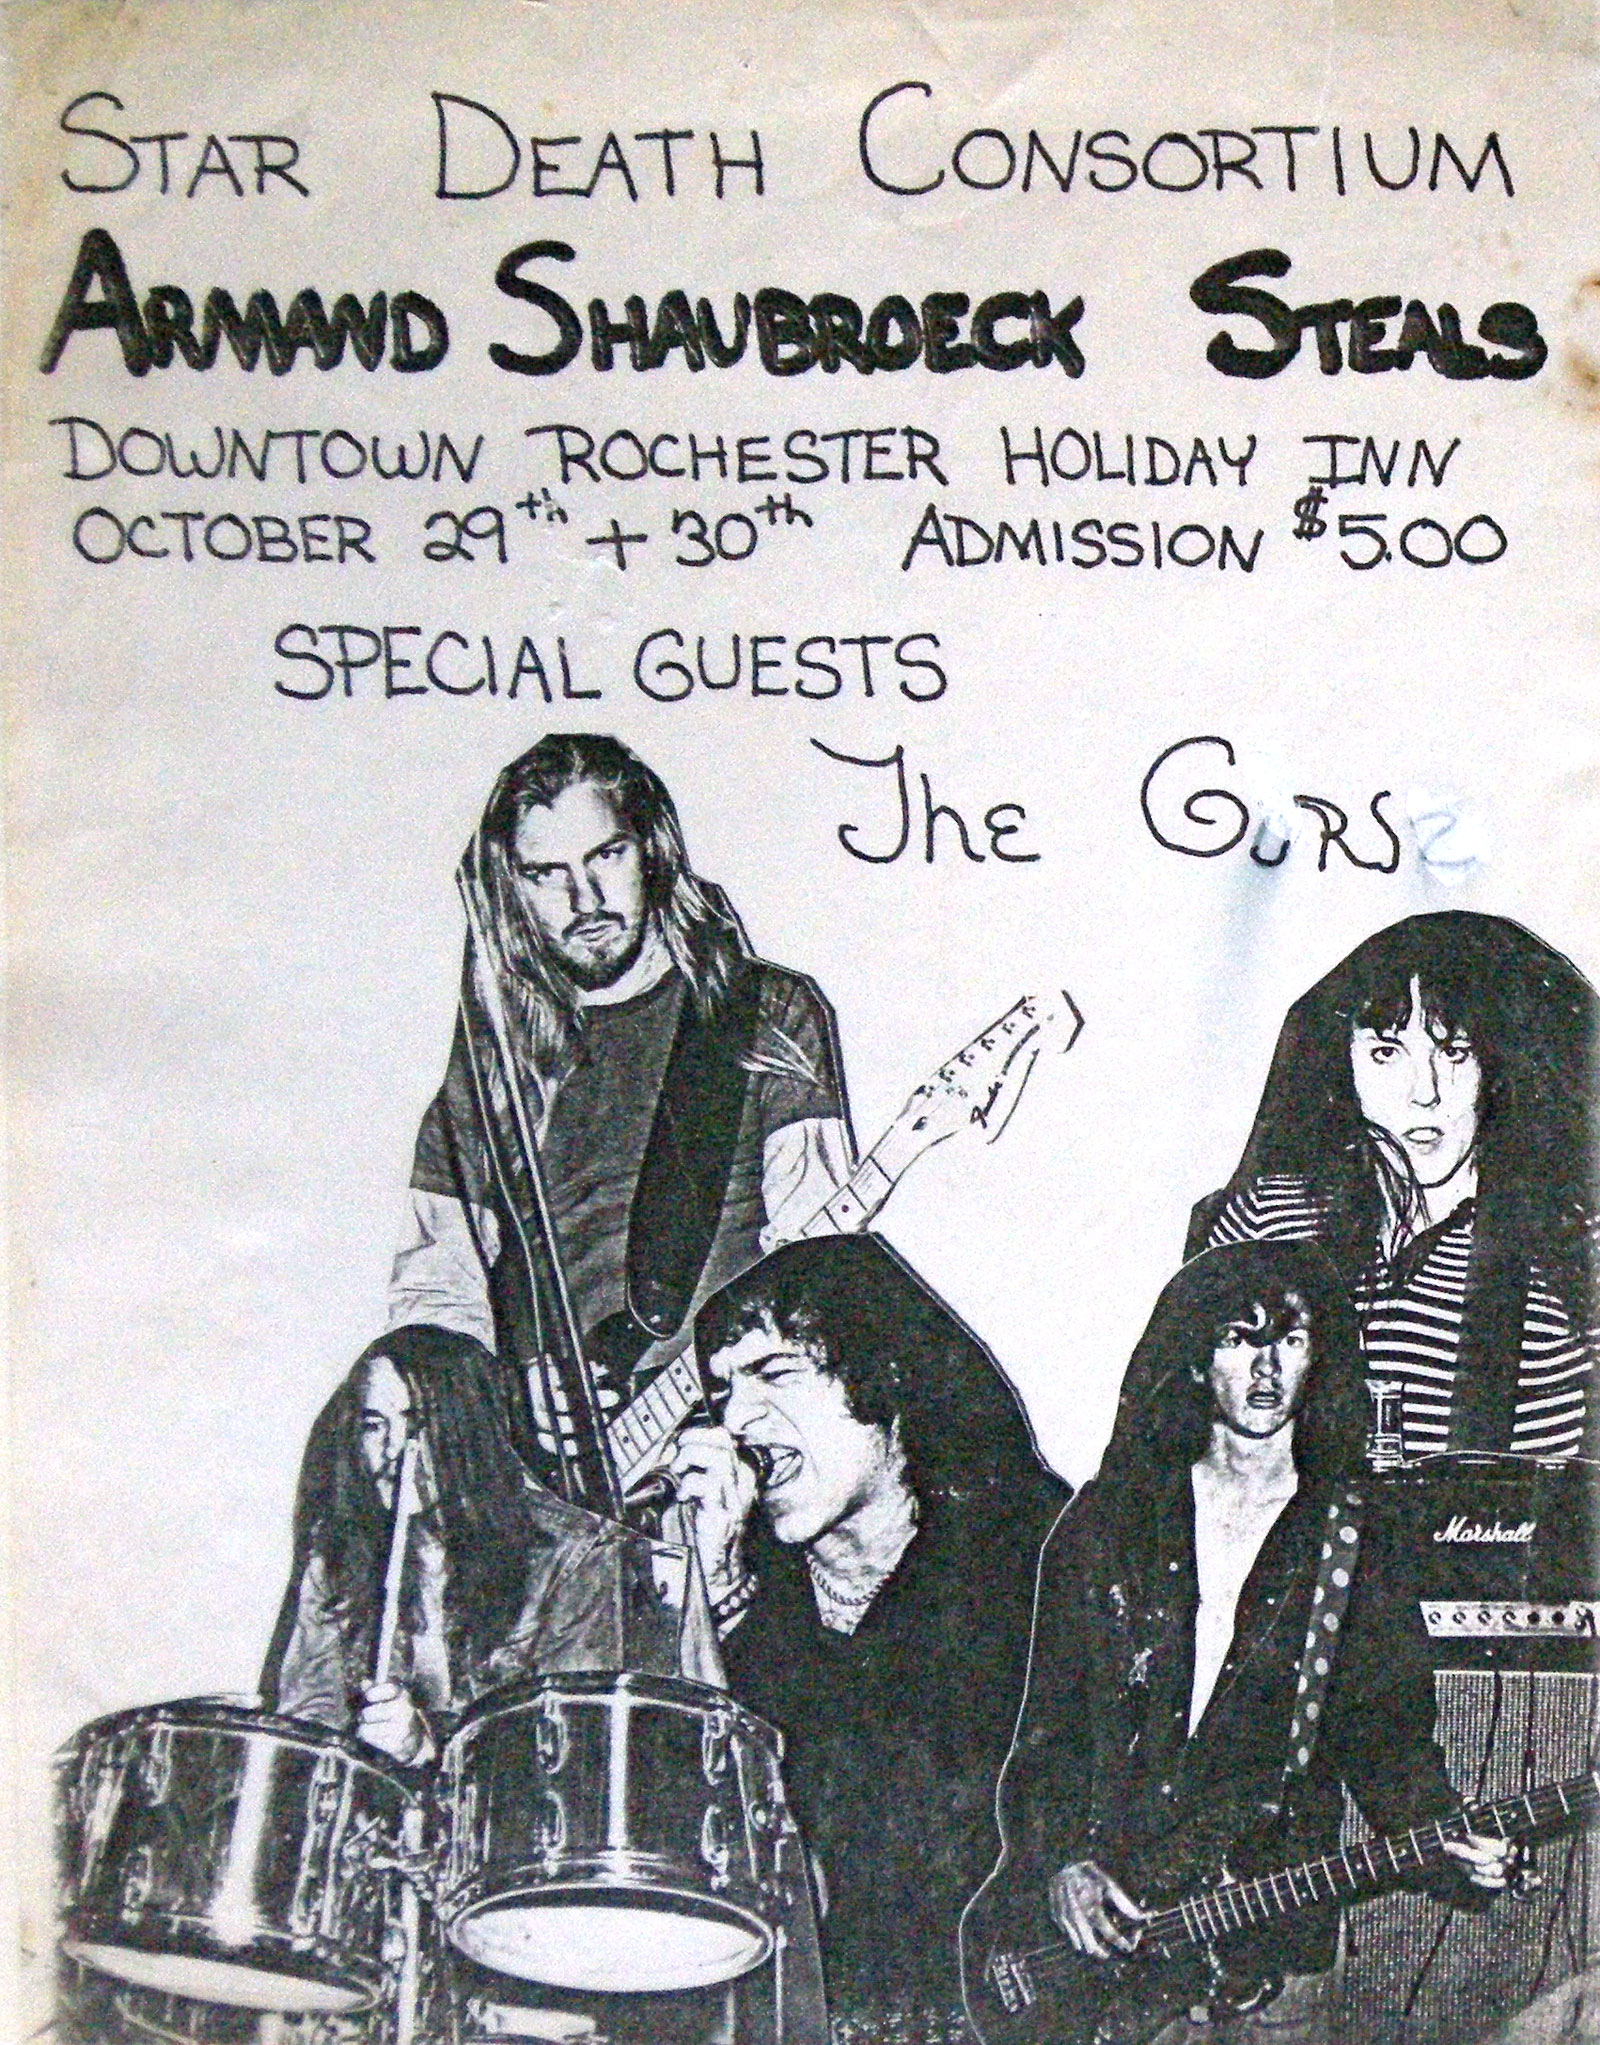 Armand Shaubroeck Steals "Star Death Consortium" at Holiday Inn in downtown Rochester, New York October 29 and 30, 1976